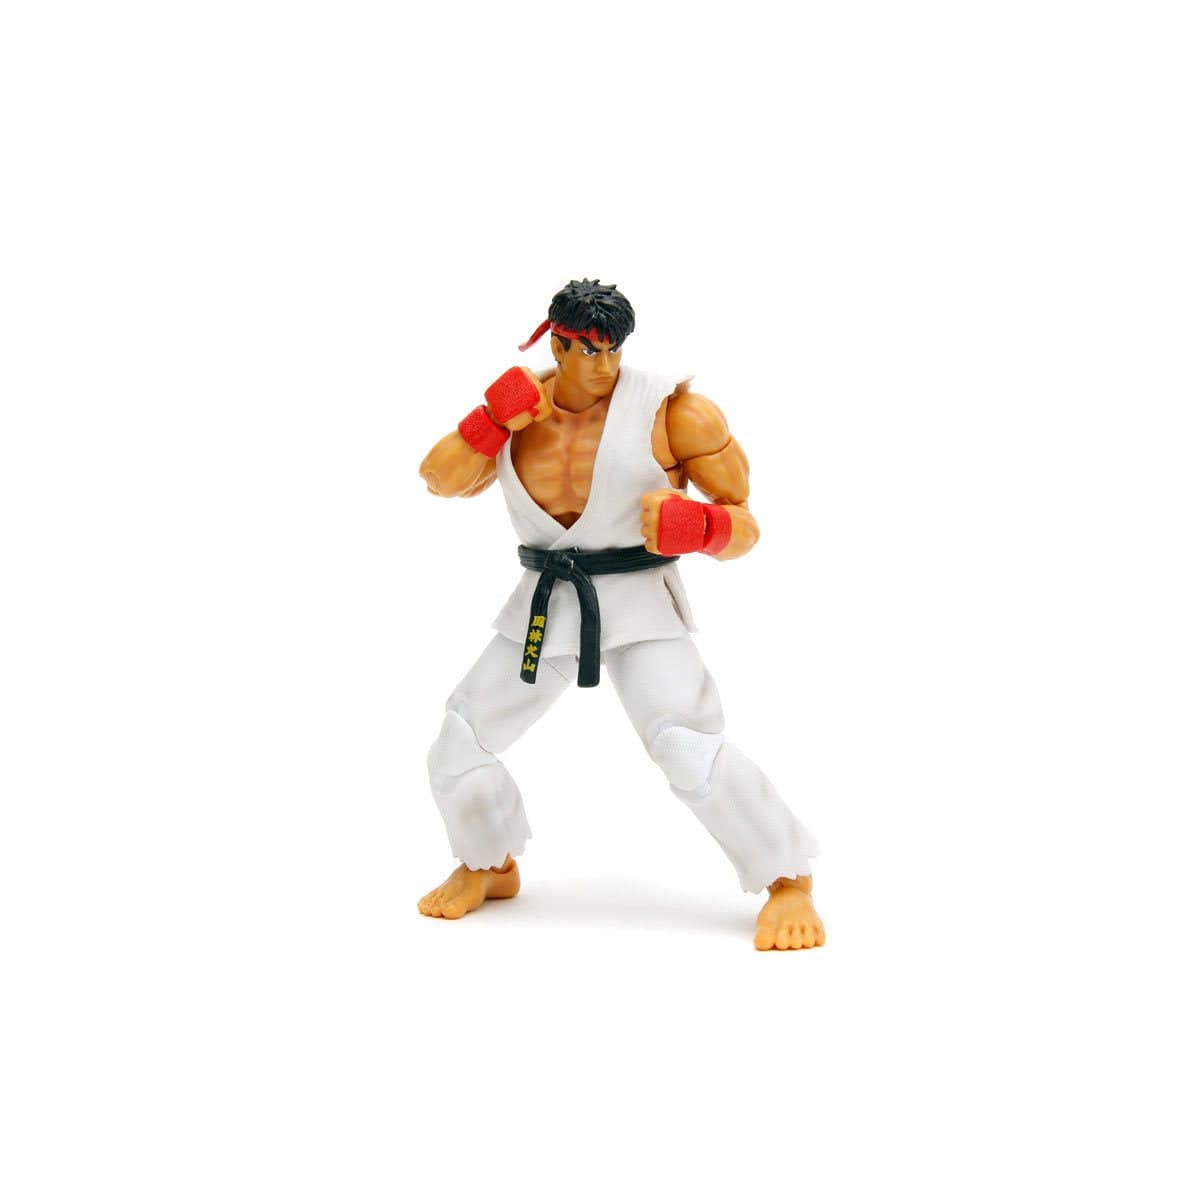 Jada-Toys-Ultra-Street-Fighter-II-Ryu-Action-Figure-TOYS-COLLECTIBLE